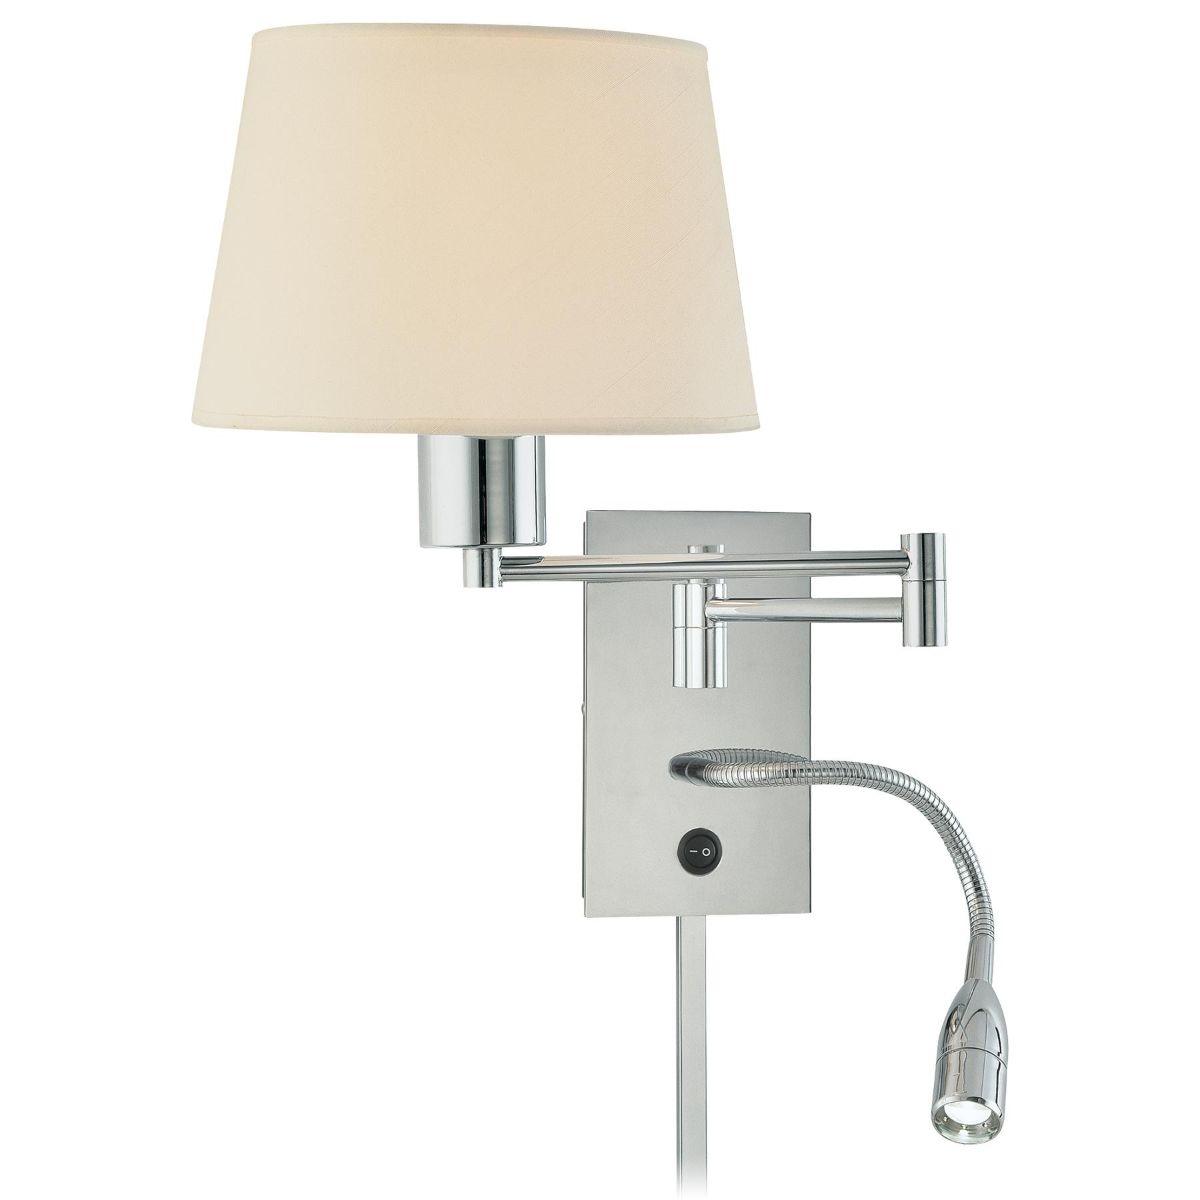 George's Reading Room Contemporary LED Wall Lamp Silver finish